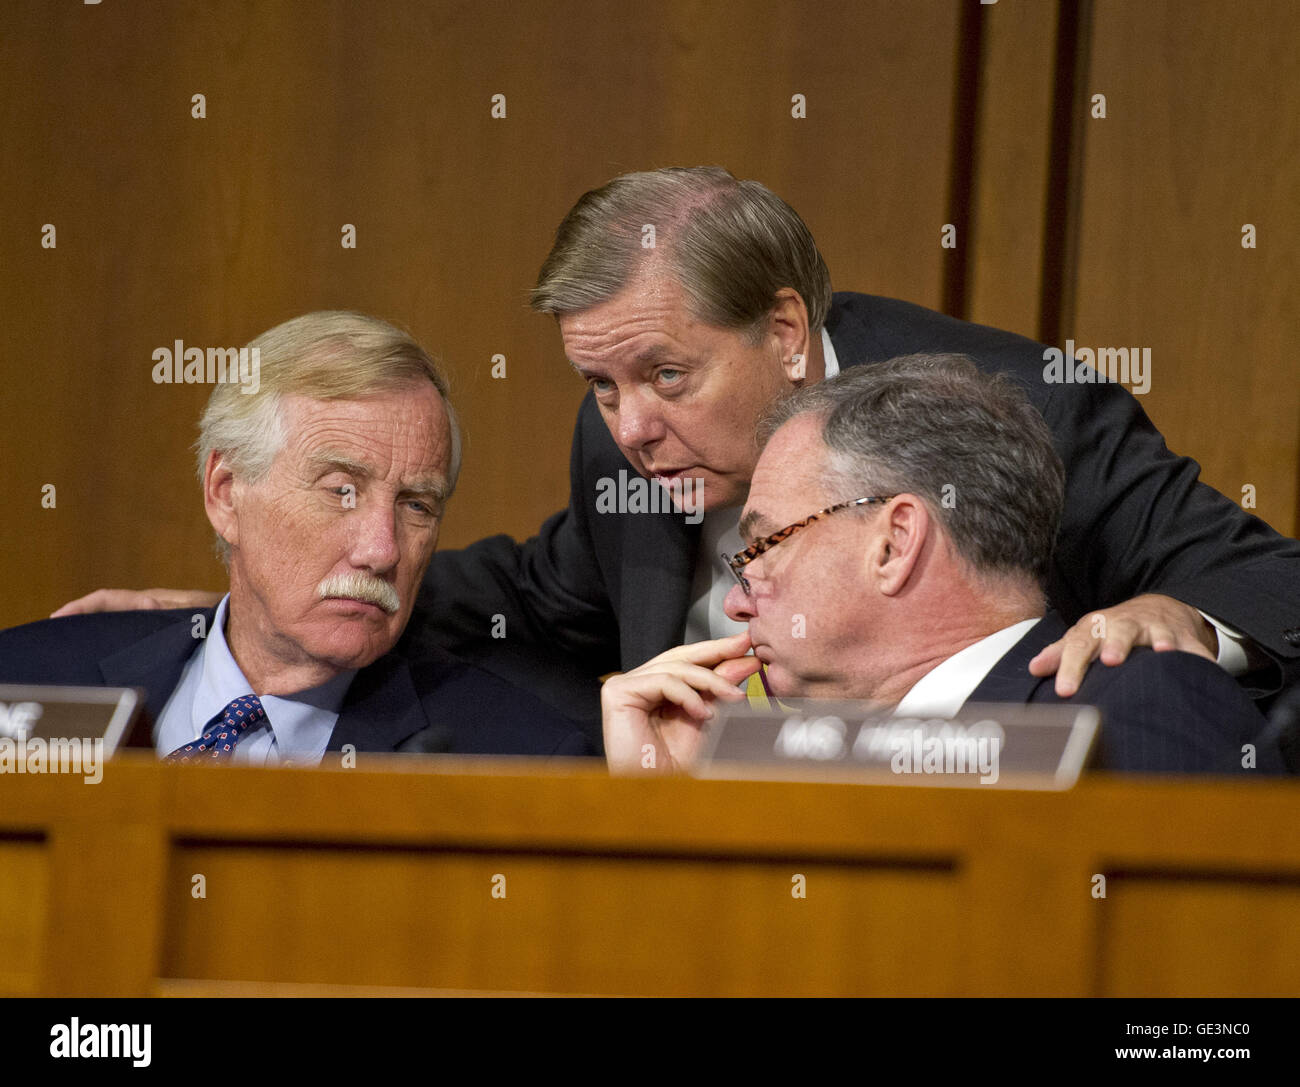 September 16, 2014 - Washington, District of Columbia, United States of America - United States Senators Angus S. King, Jr. (Independent of Maine), left, Lindsey Graham (Republican of South Carolina), center, and Tim Kaine (Democrat of Virginia), right, share some thoughts as U.S. Secretary of Defense Chuck Hagel and Chairman, Joint Chiefs of Staff, General Martin E. Dempsey, U.S. Army, deliver testimony before the U.S. Senate Committee on Armed Services on the U.S. policy towards Iraq and Syria and the threat posed by the Islamic State of Iraq and the Levant (ISIL) in Washington, DC on Tues Stock Photo